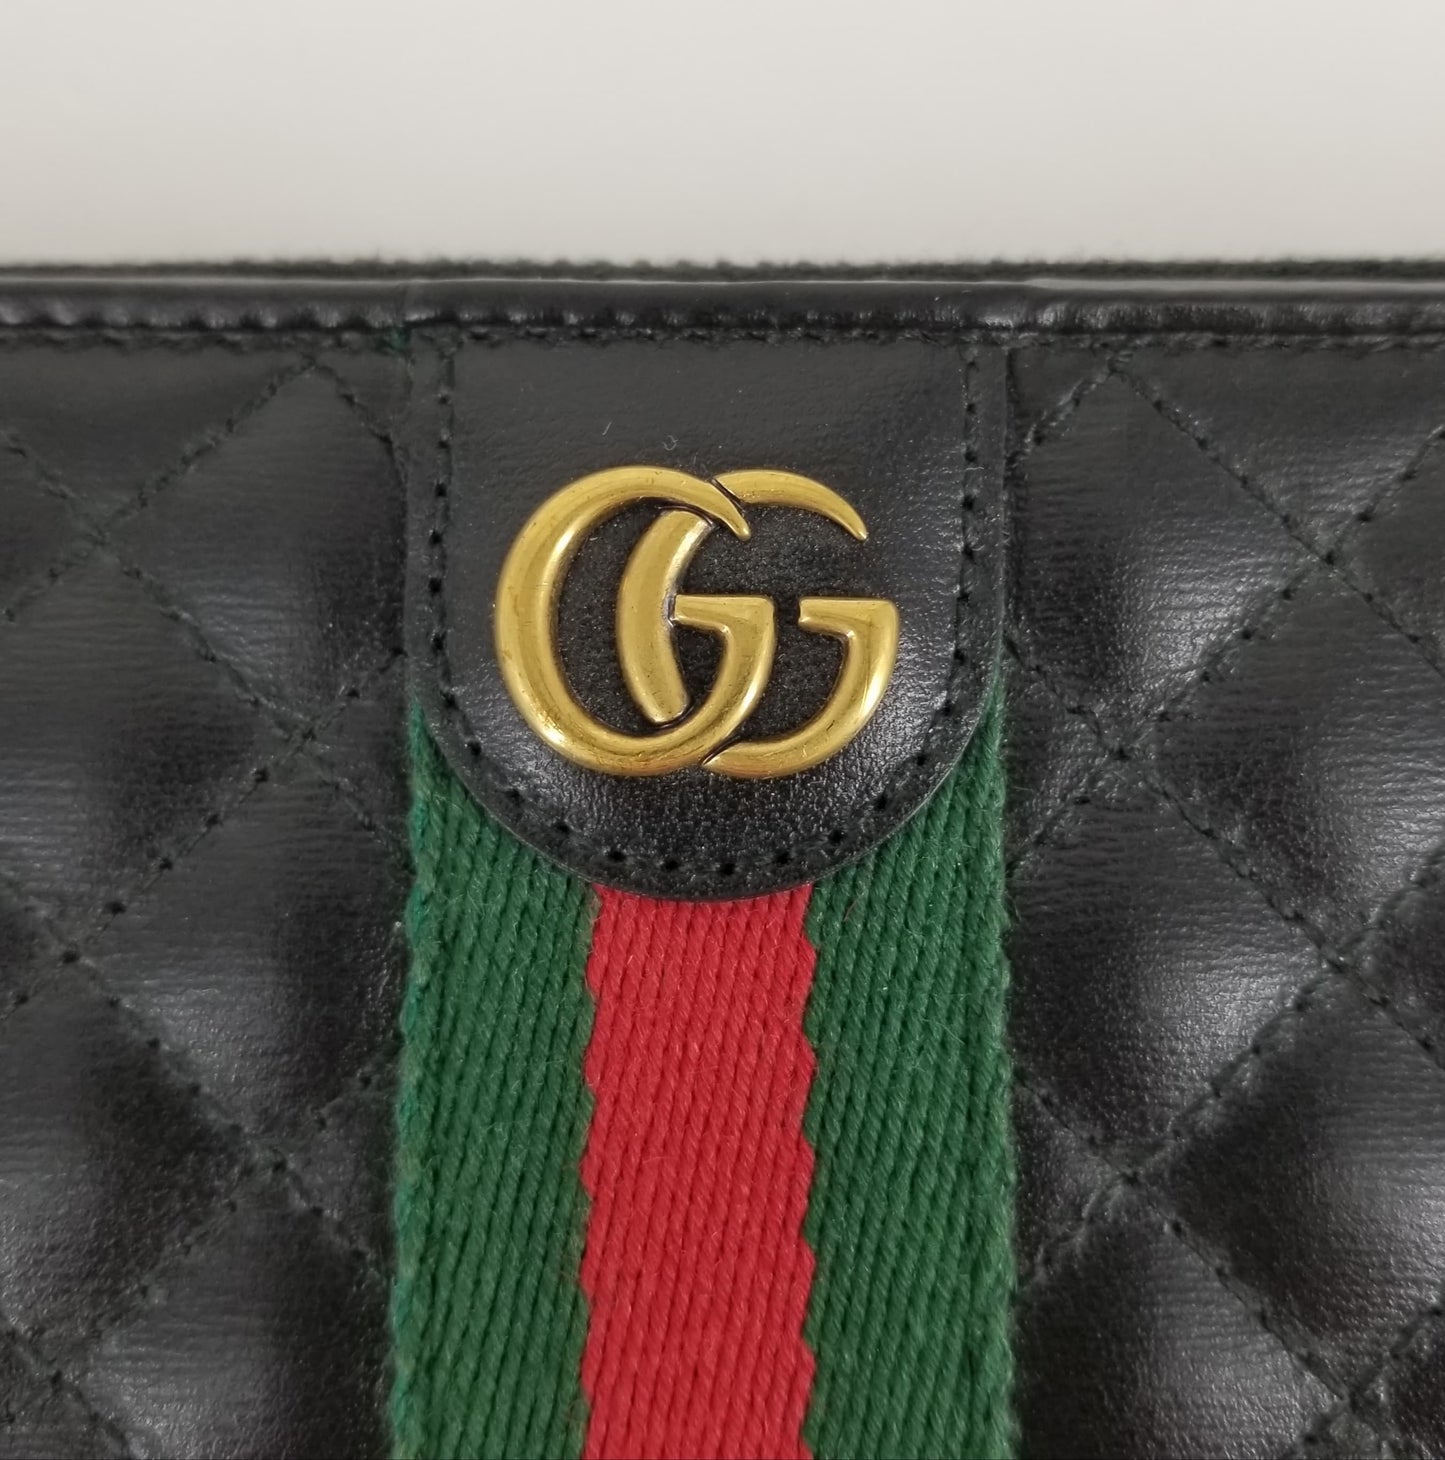 Authentic Gucci Quilted Black Vintage Stripe Zippy